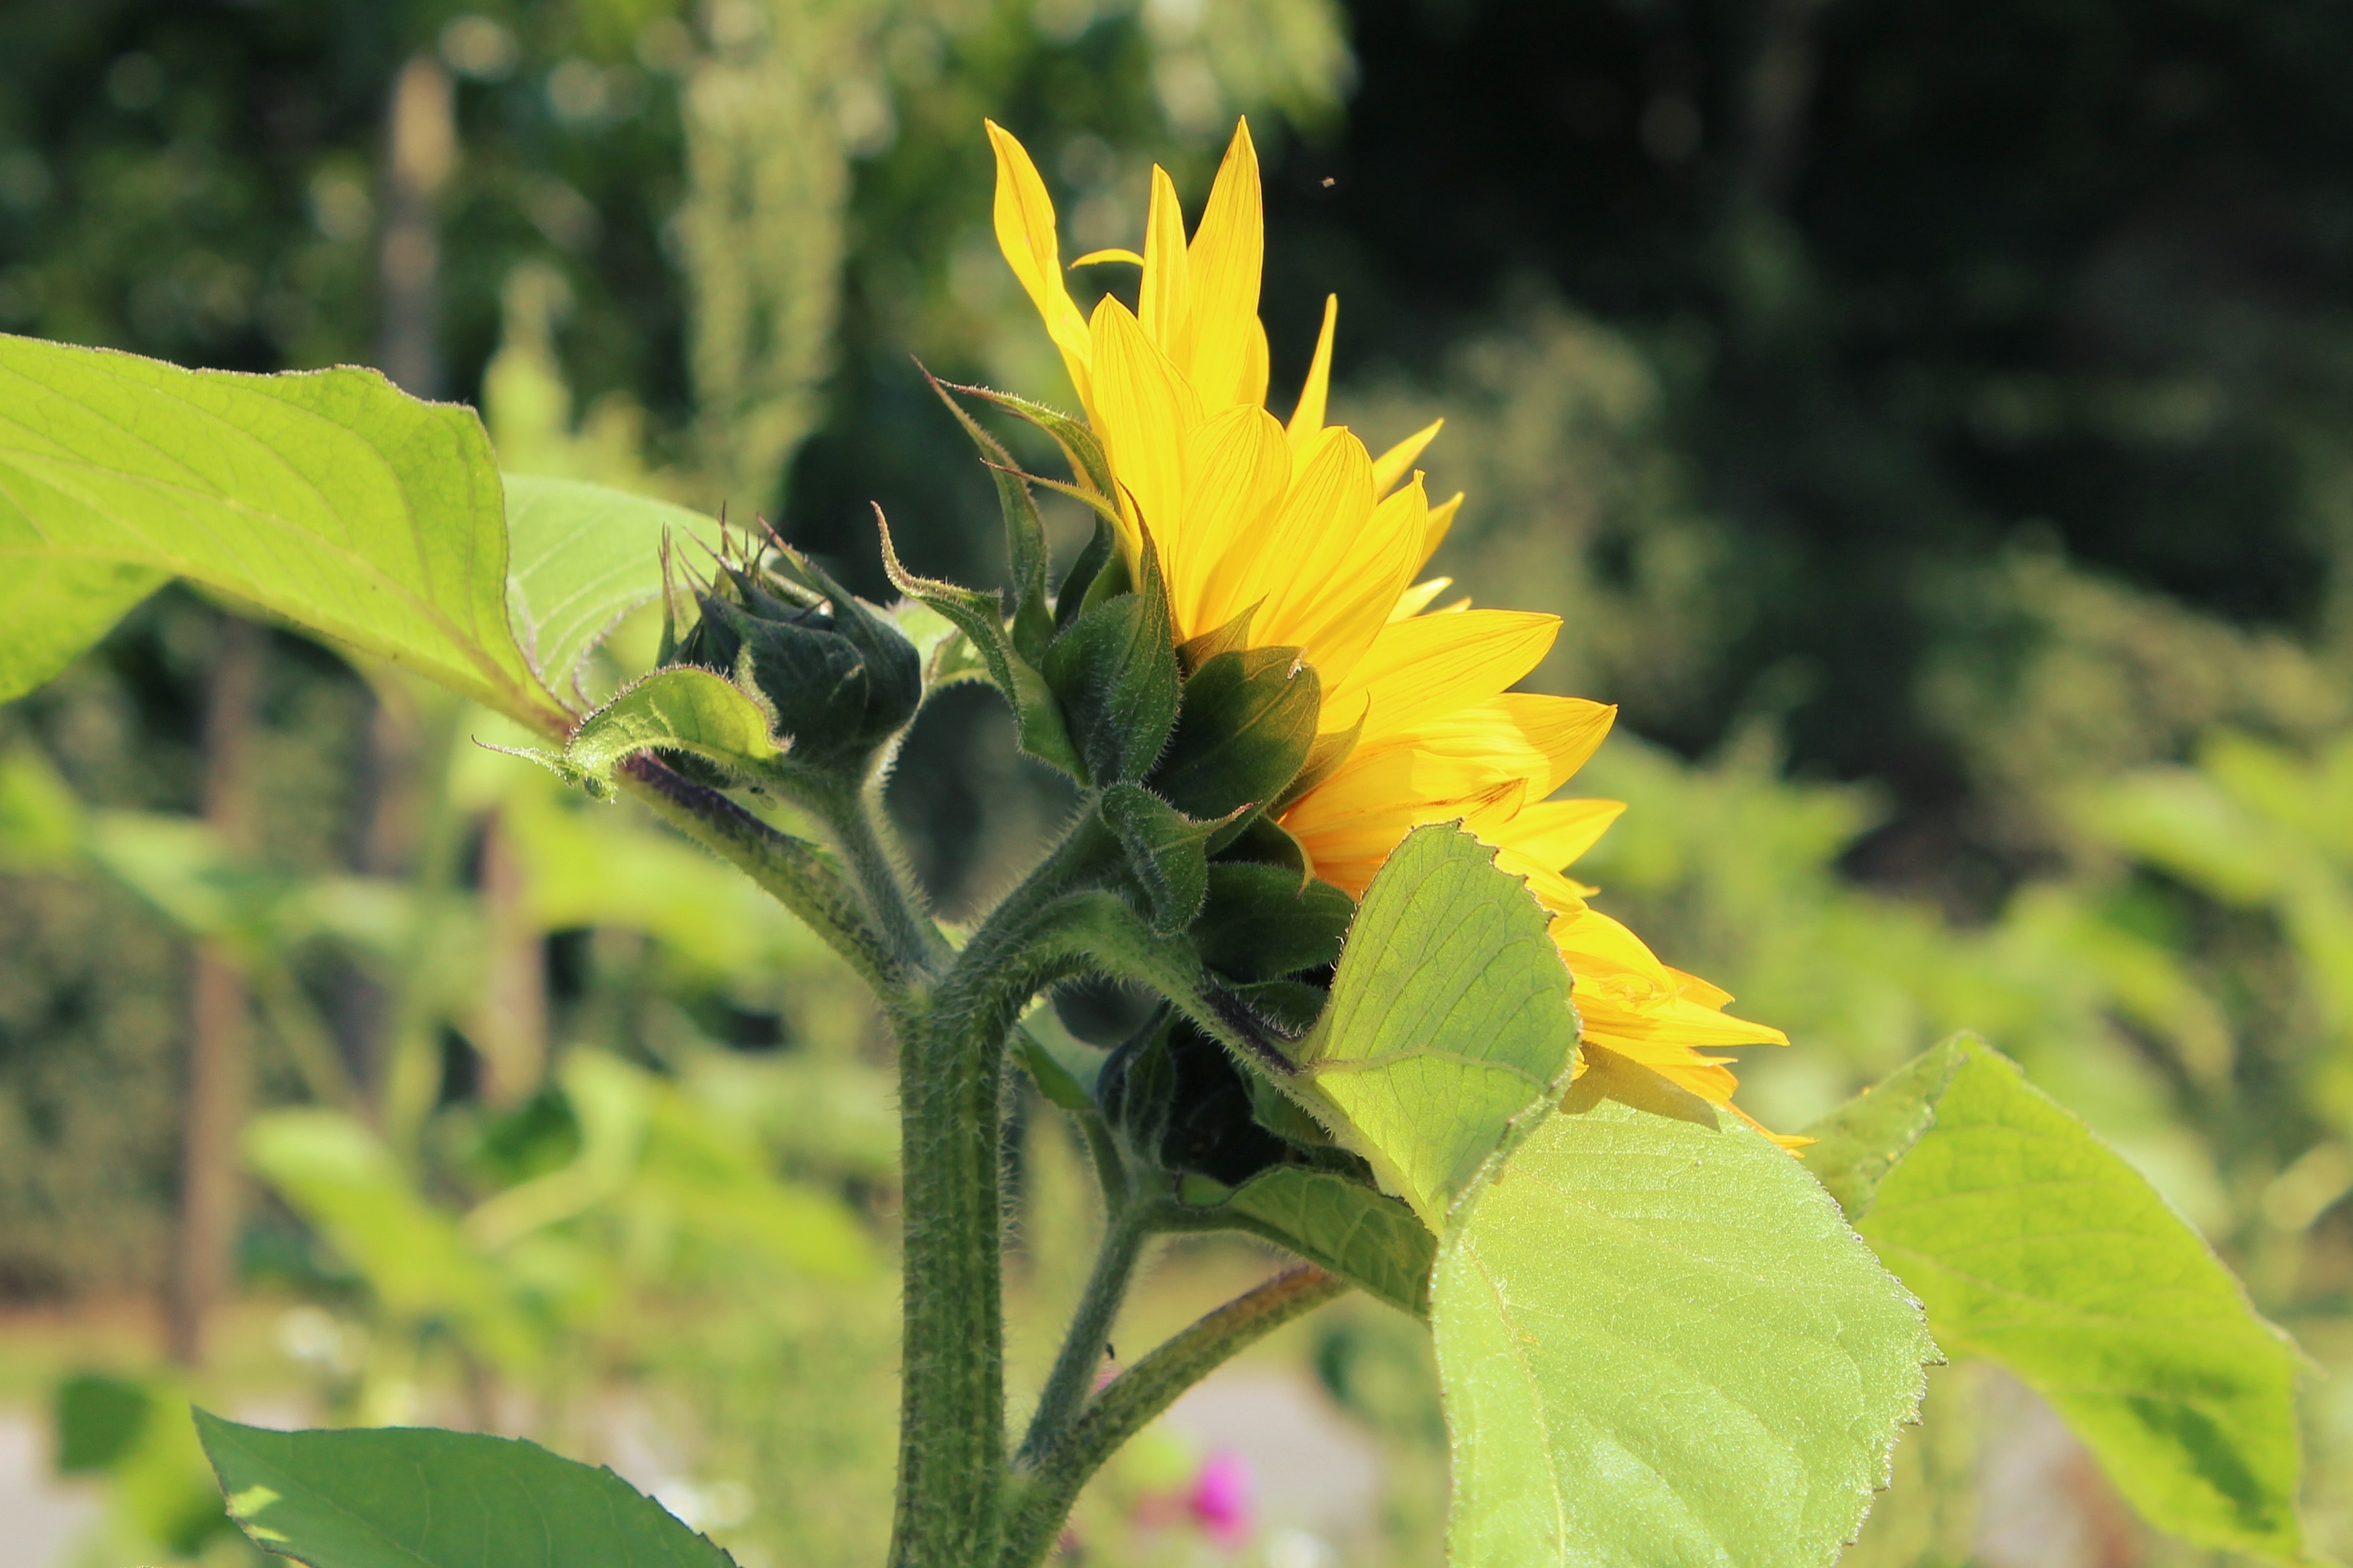 yellow sunflower at daytime in selective focus photography